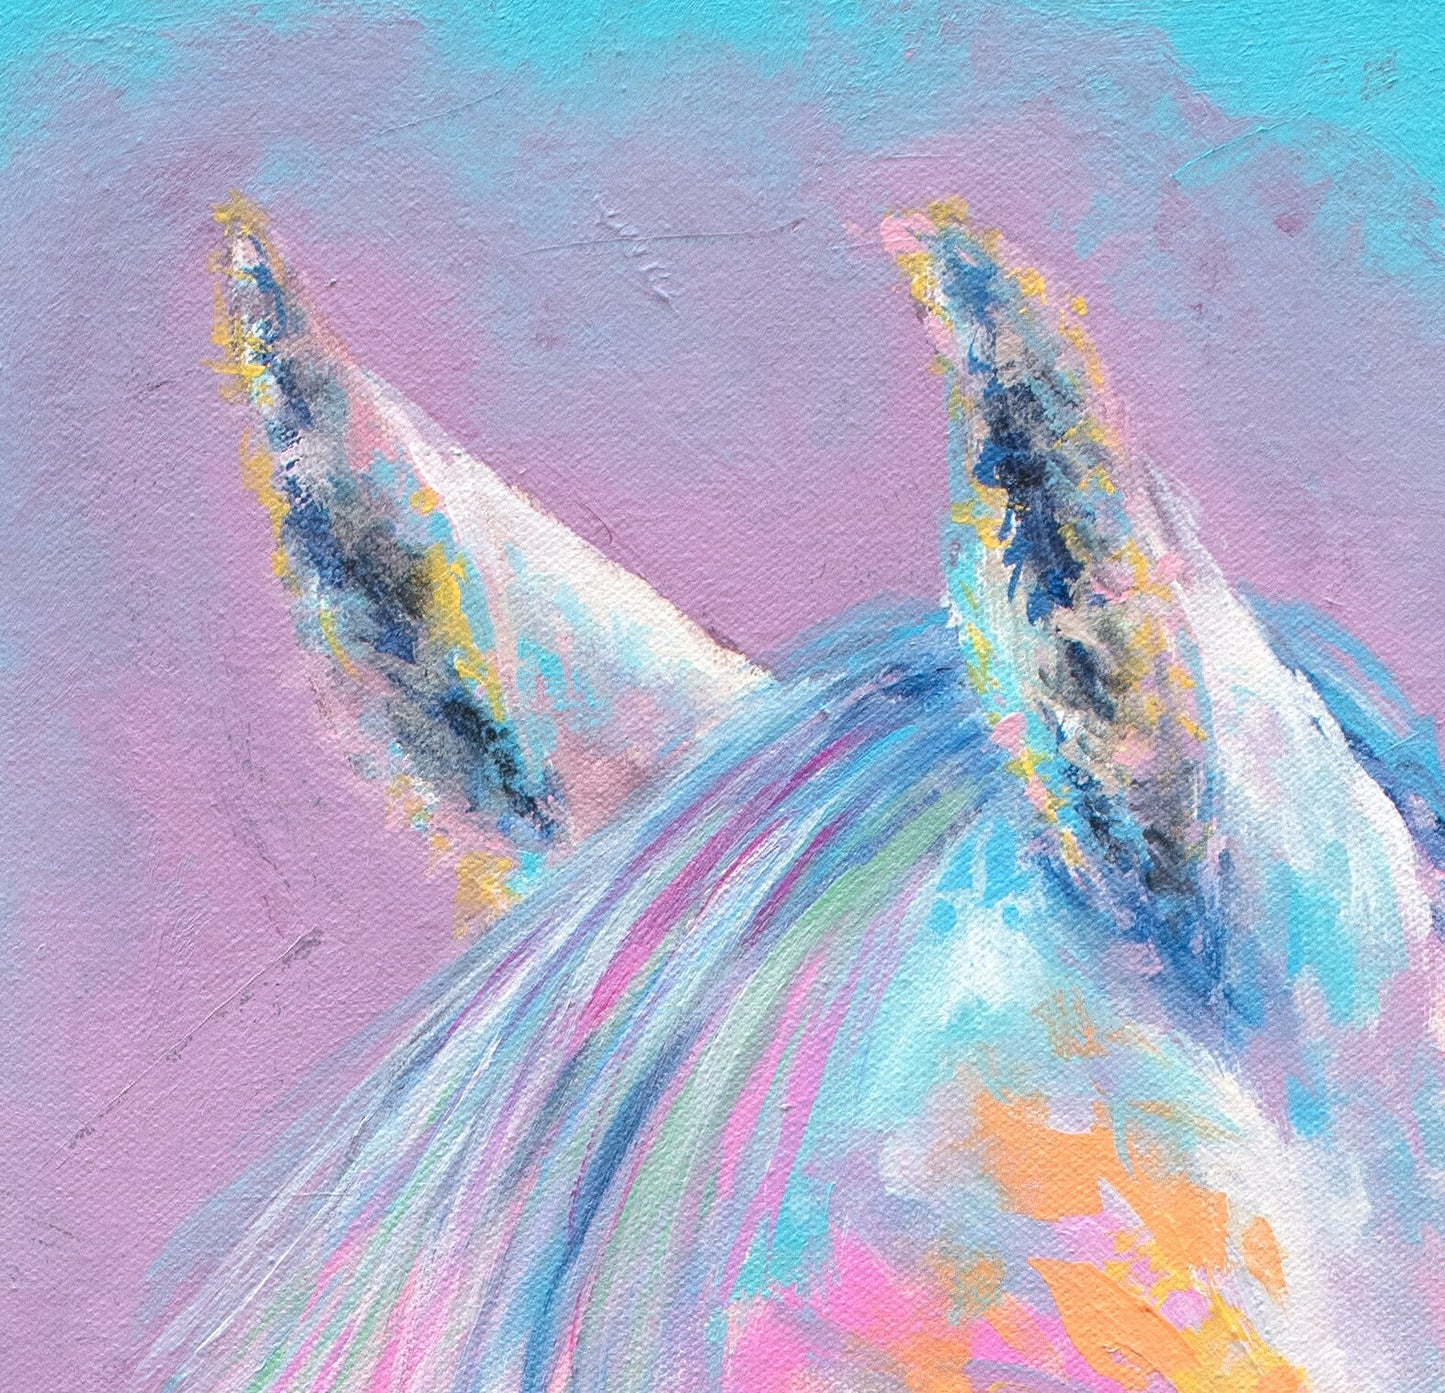 Horse Art Print on CANVAS or PAPER - Colorful Horse Painting by Krystle Cole